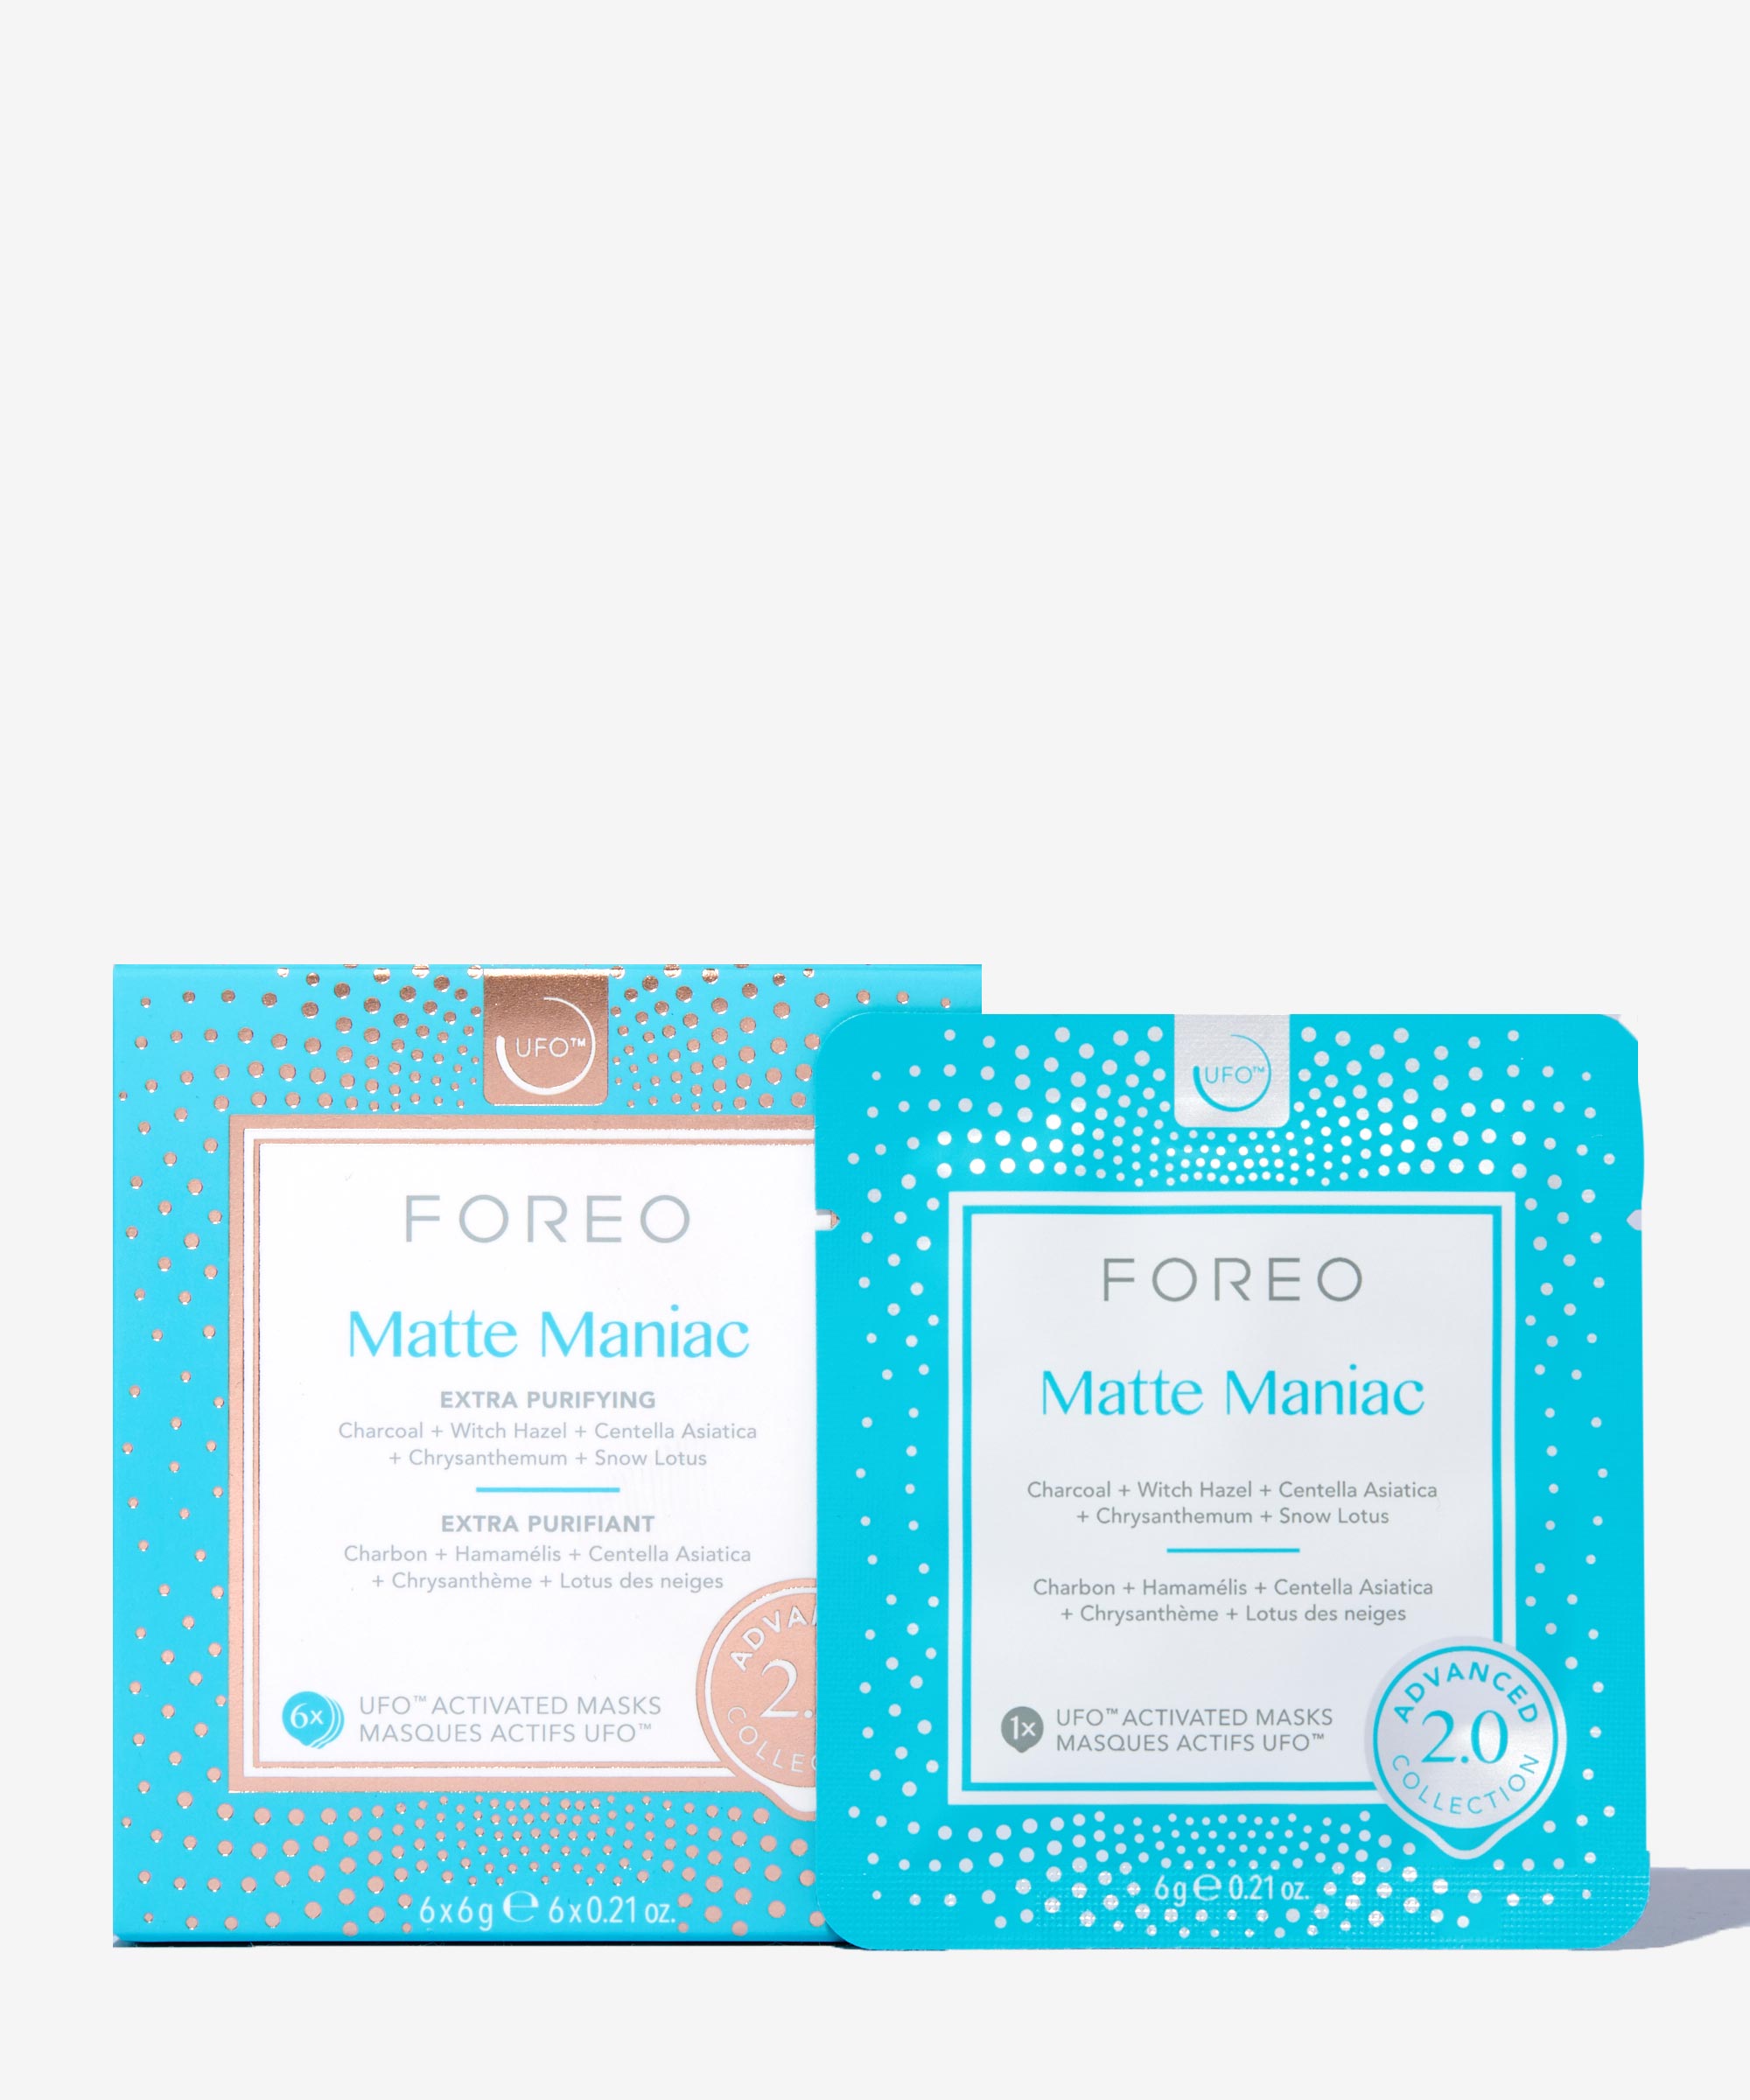 Foreo Matte Maniac 2.0 UFO-Activated Mask at BEAUTY Purifying BAY